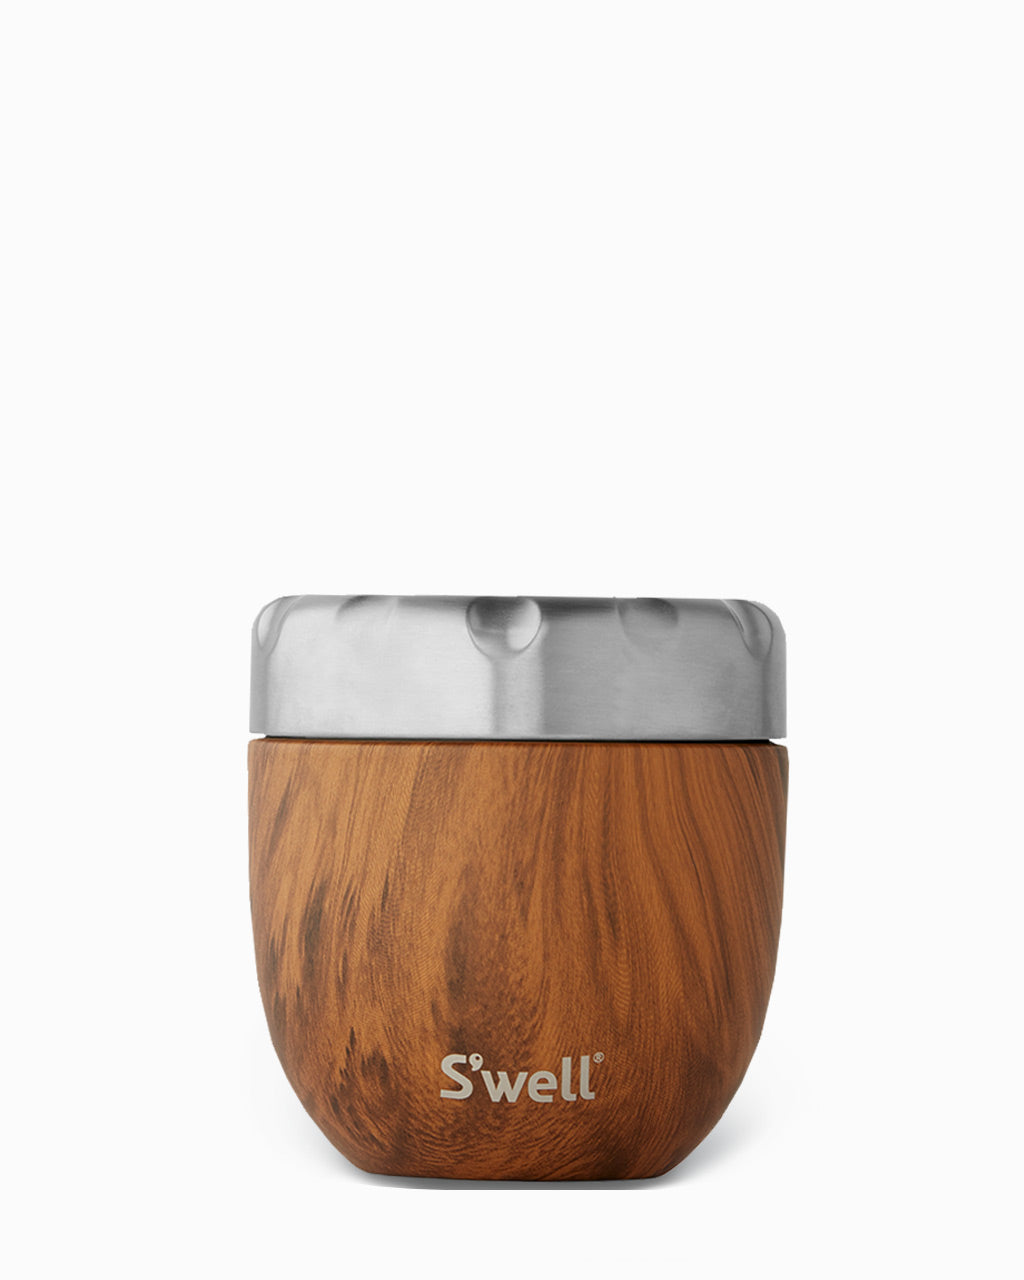 S'well Stainless Steel Food Bowls